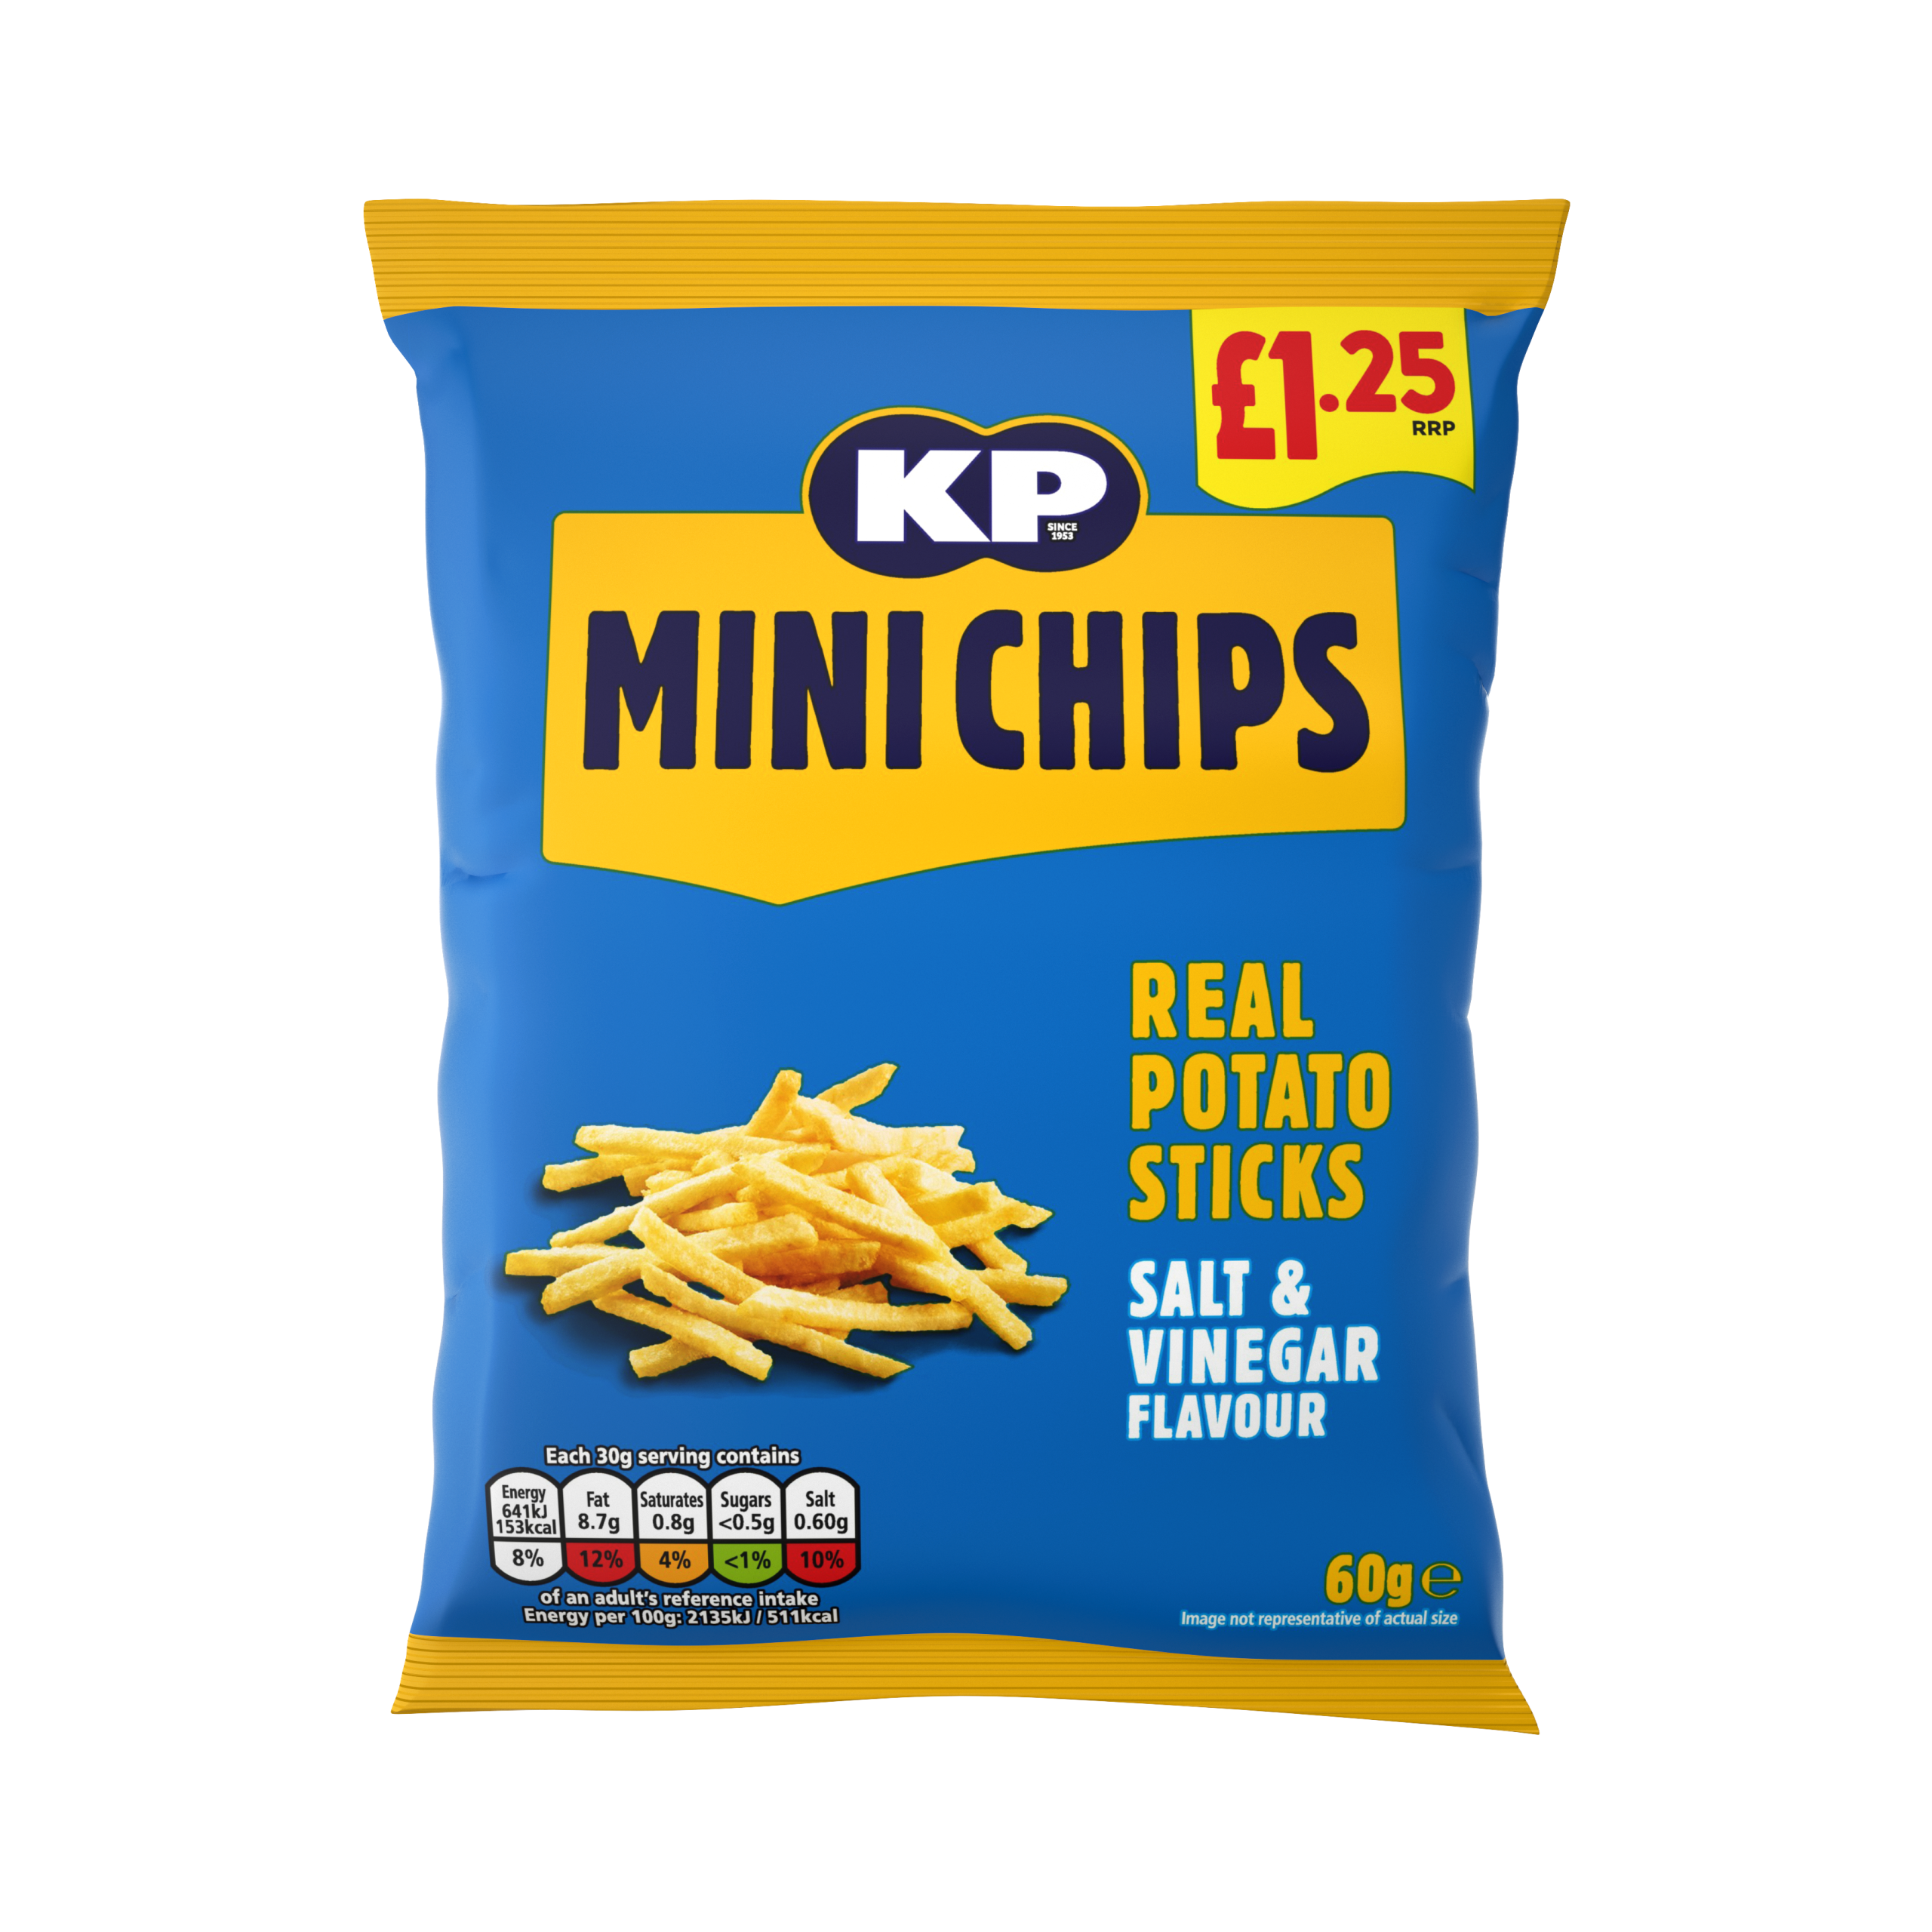 KP Snacks launches KP Mini Chips in PMP format